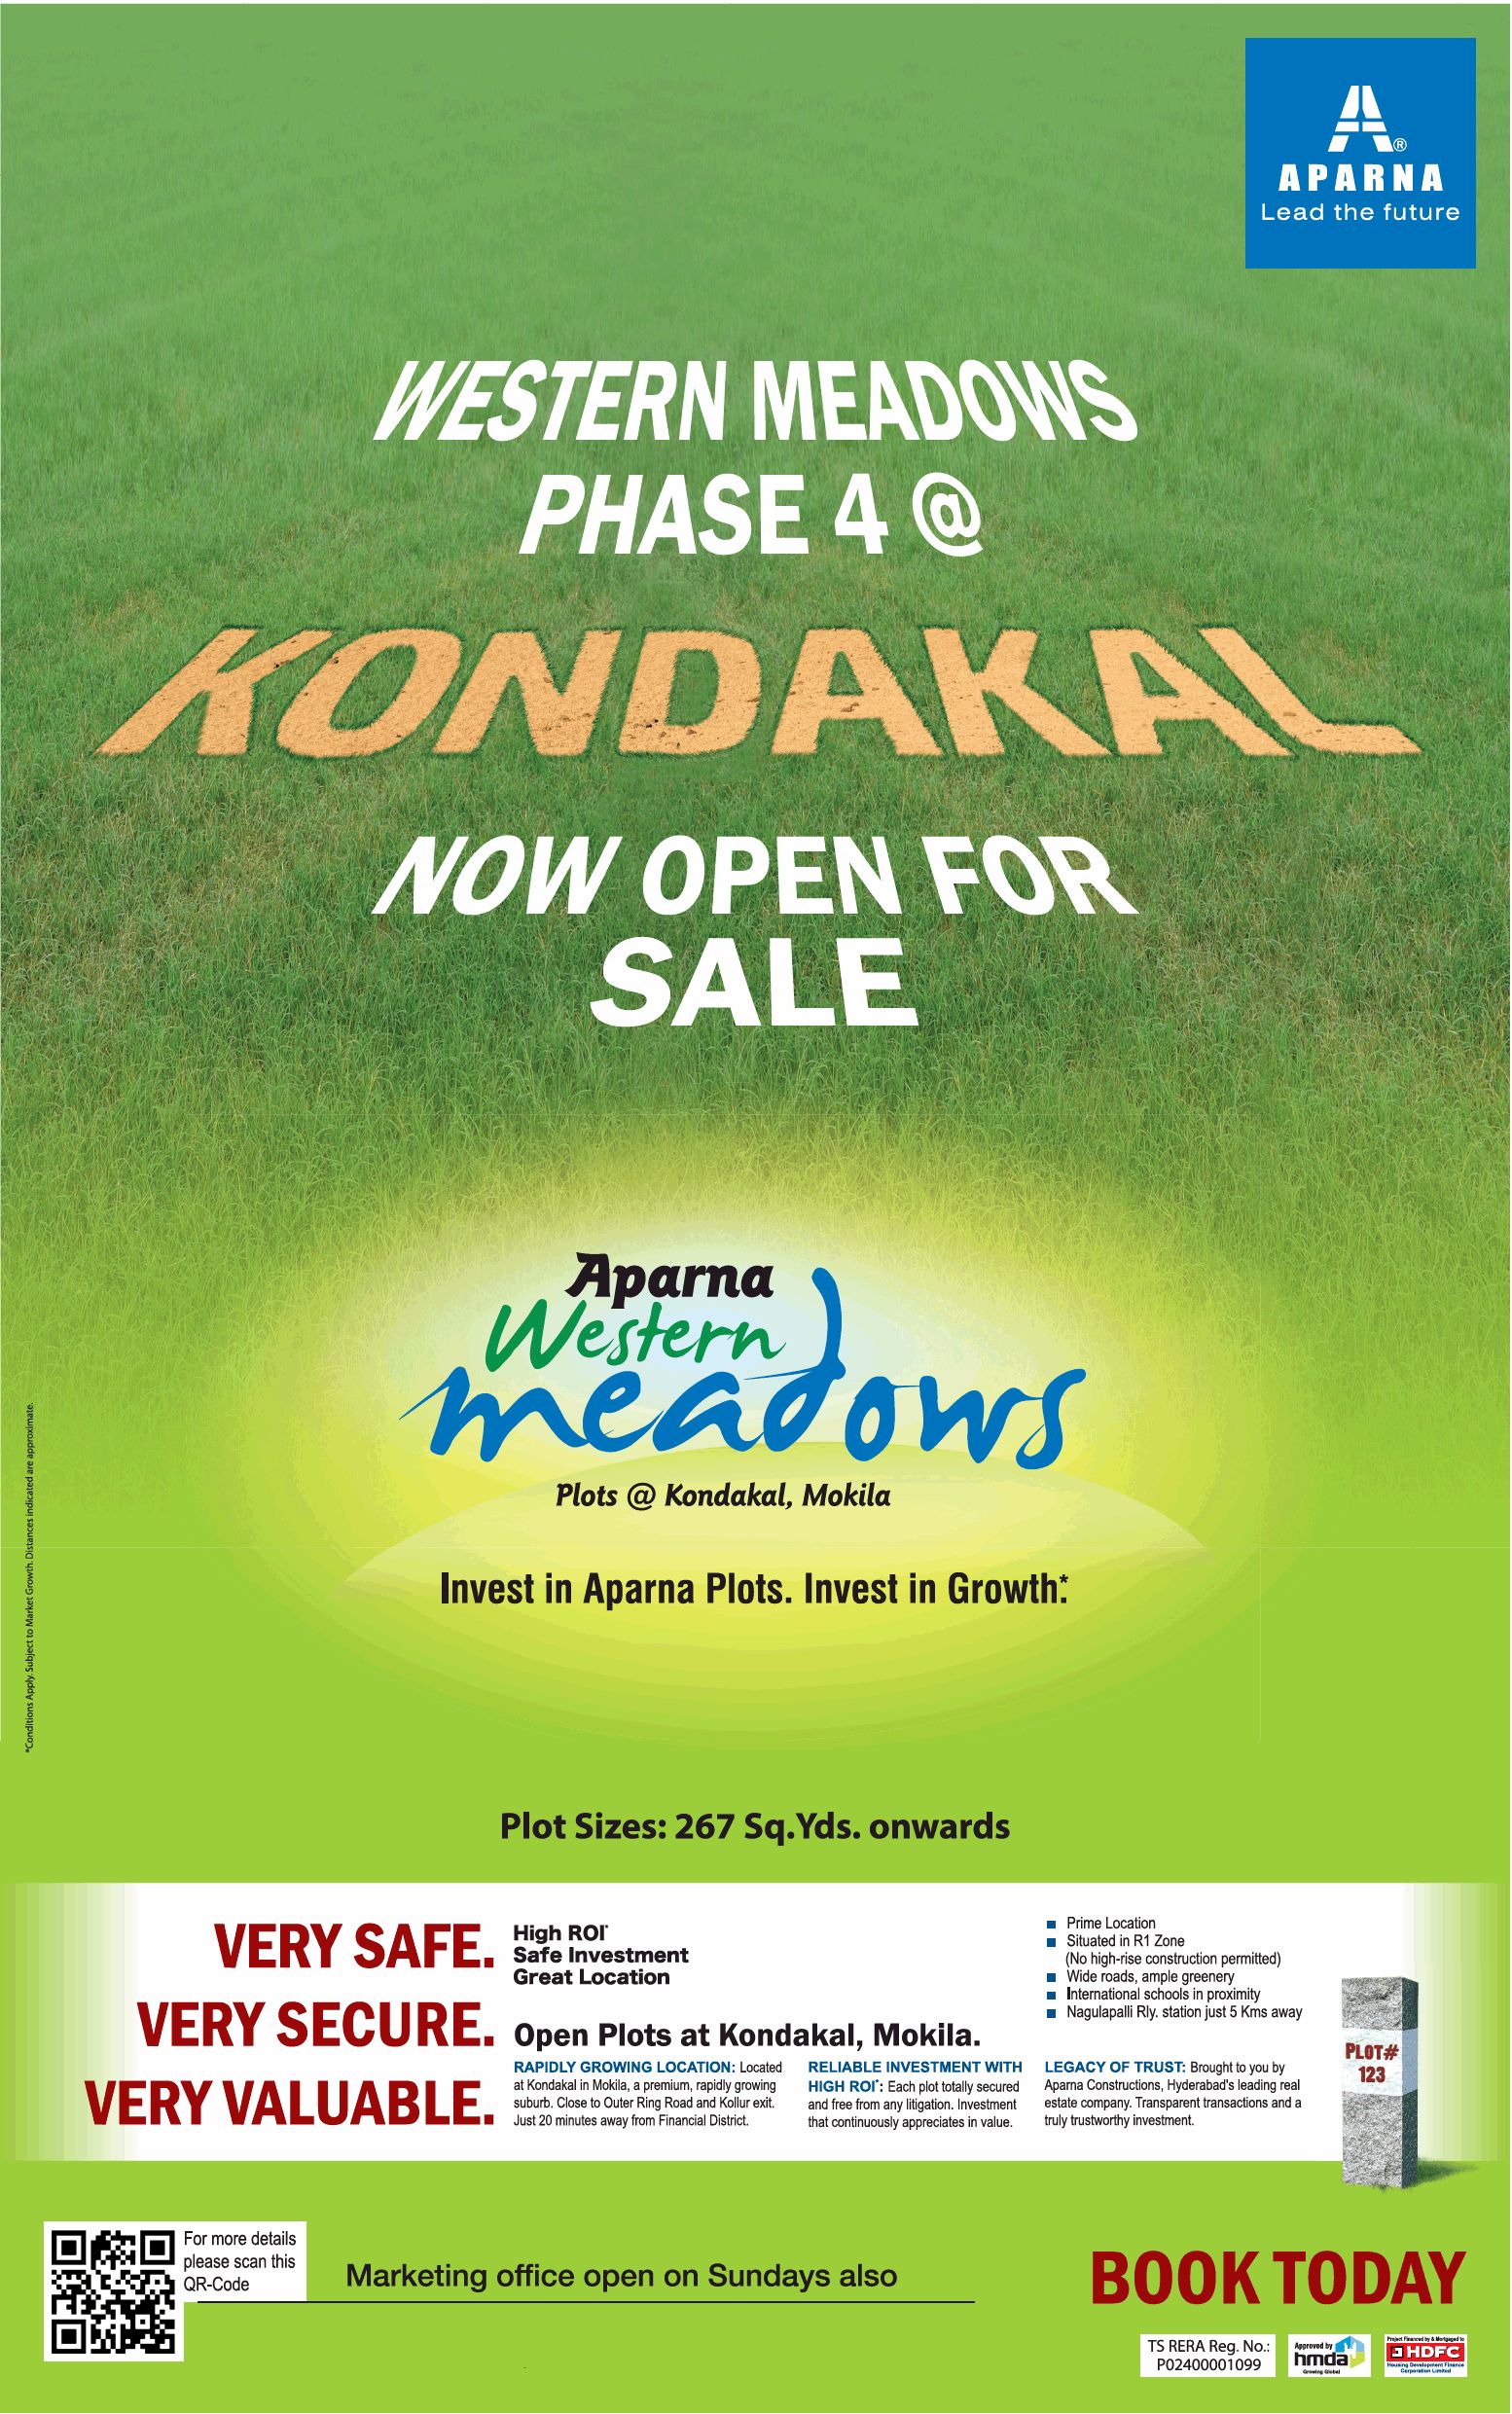 Now open for sale at Aparna Western Meadows, Hyderabad Update